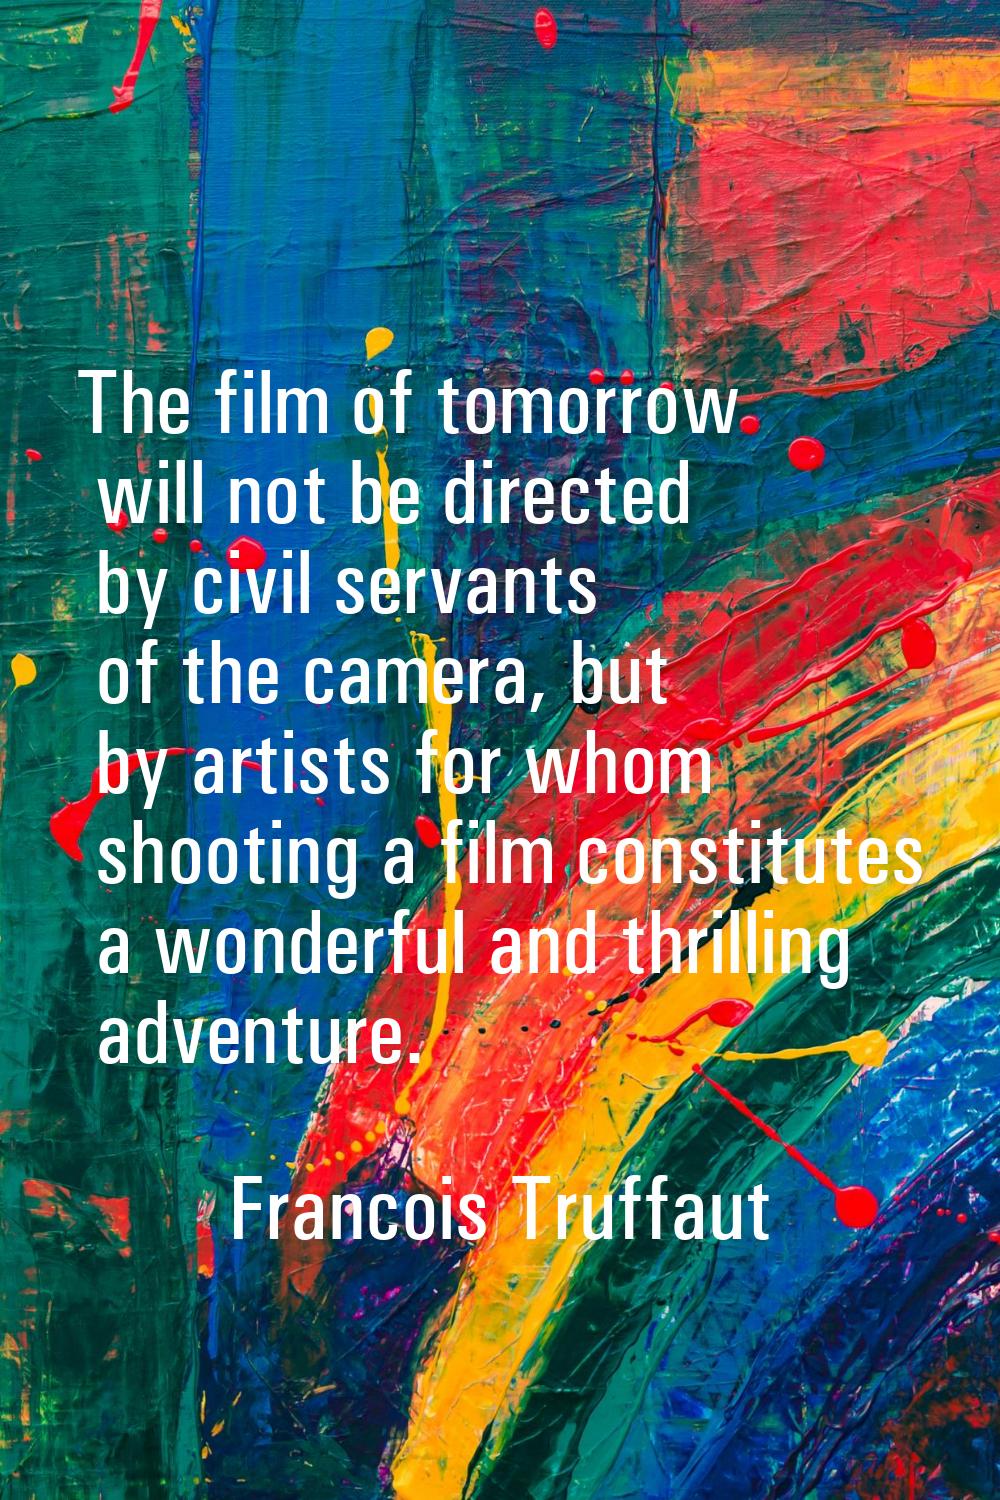 The film of tomorrow will not be directed by civil servants of the camera, but by artists for whom 